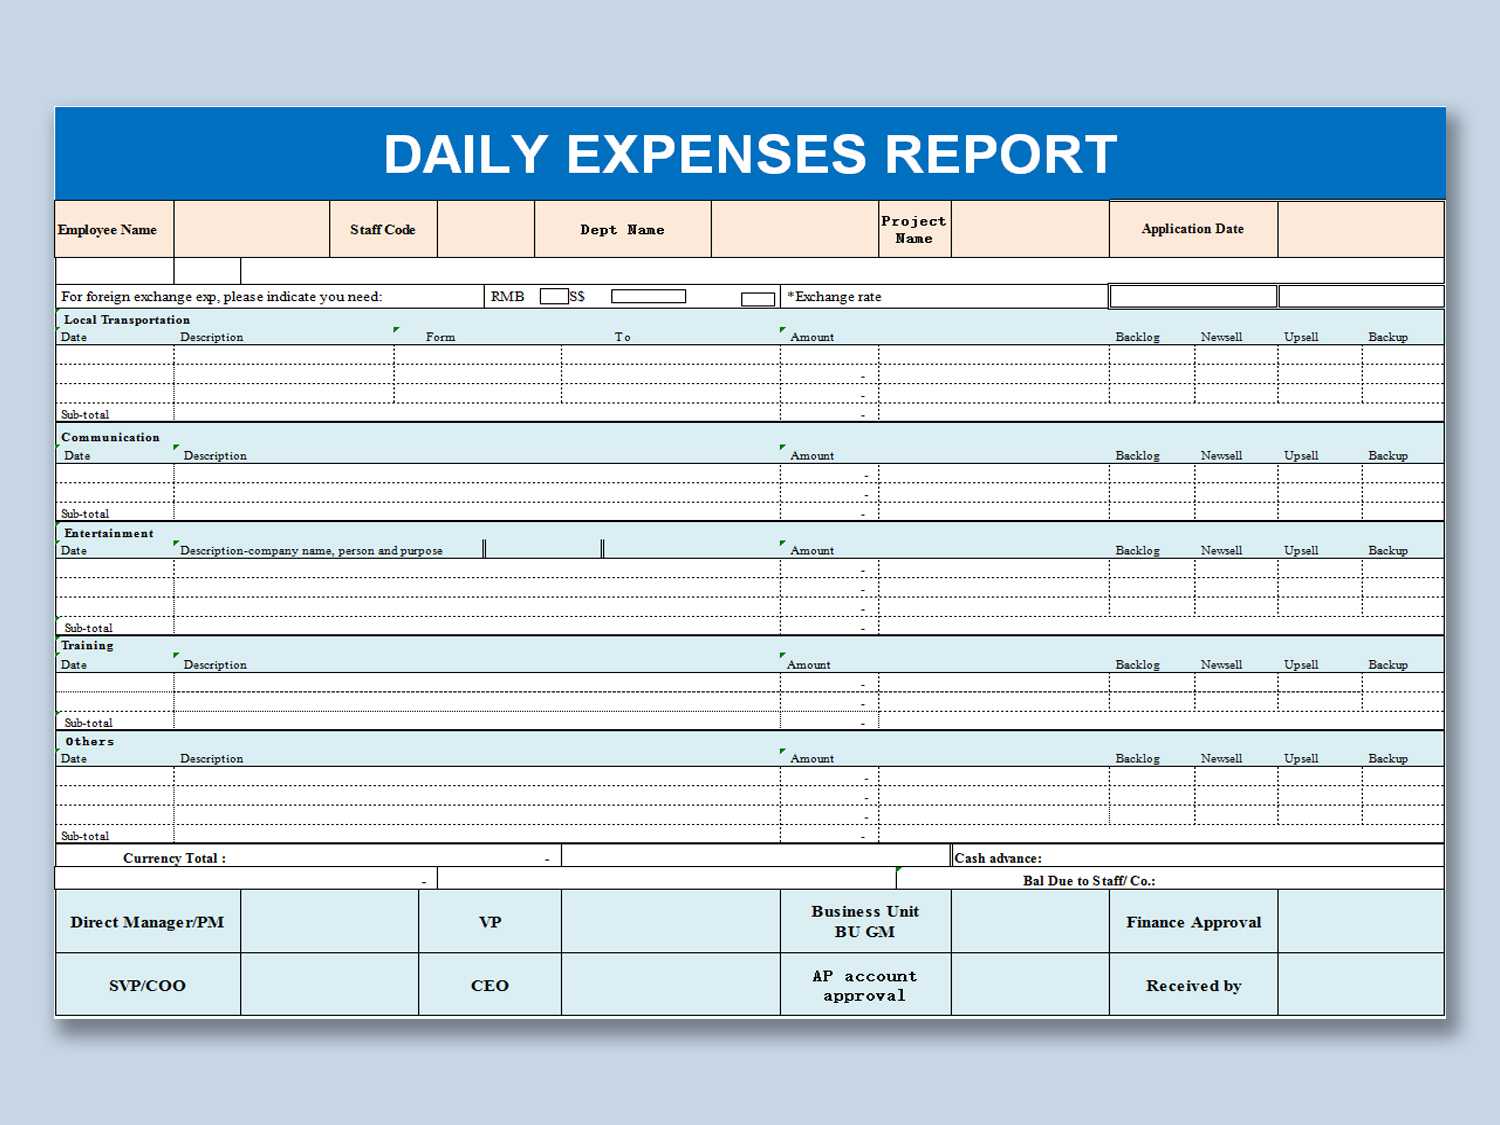 Wps Template – Free Download Writer, Presentation Intended For Daily Expense Report Template